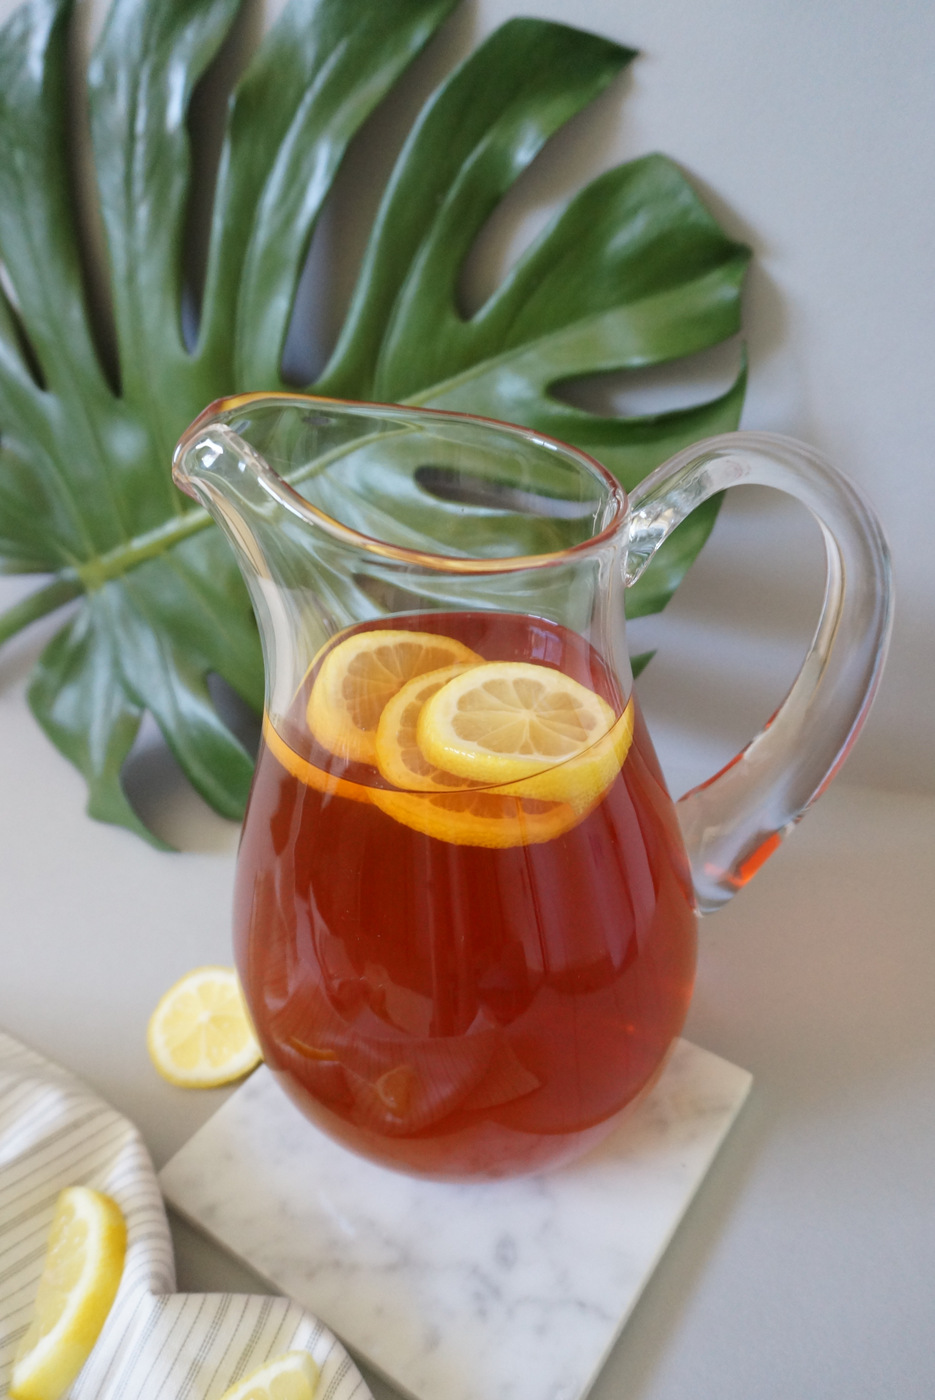 Iced-tea-in-a-glass-pitcher